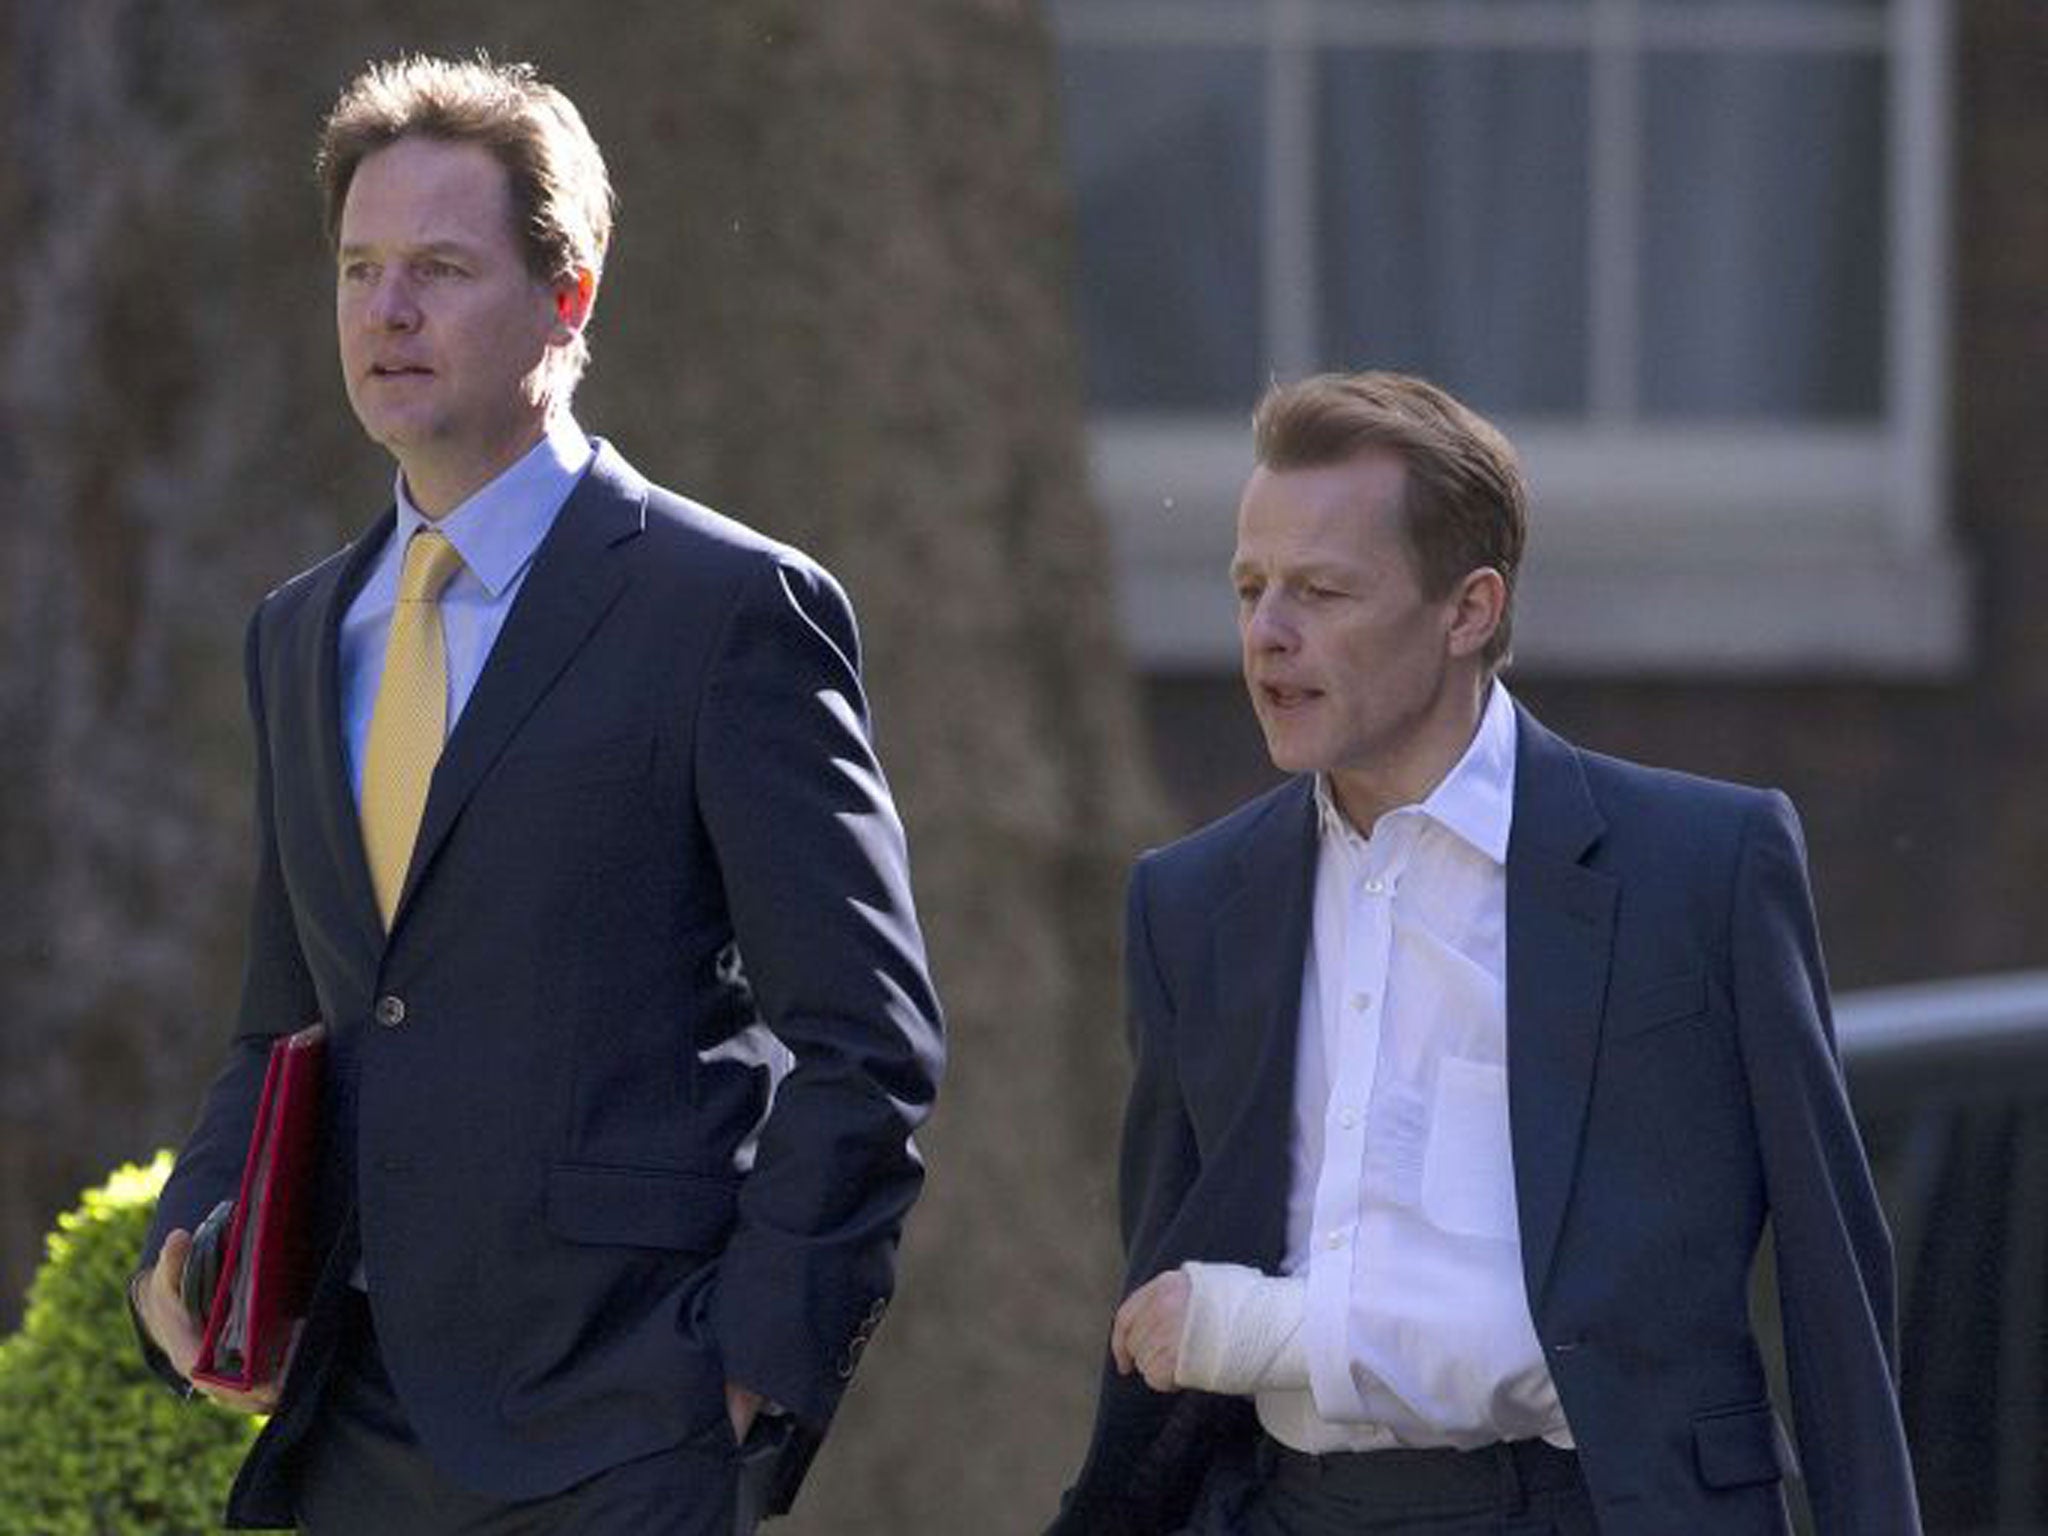 David Laws (pictured with Nick Clegg, left) was speaking at the Association of Teachers and Lecturers conference in Manchester